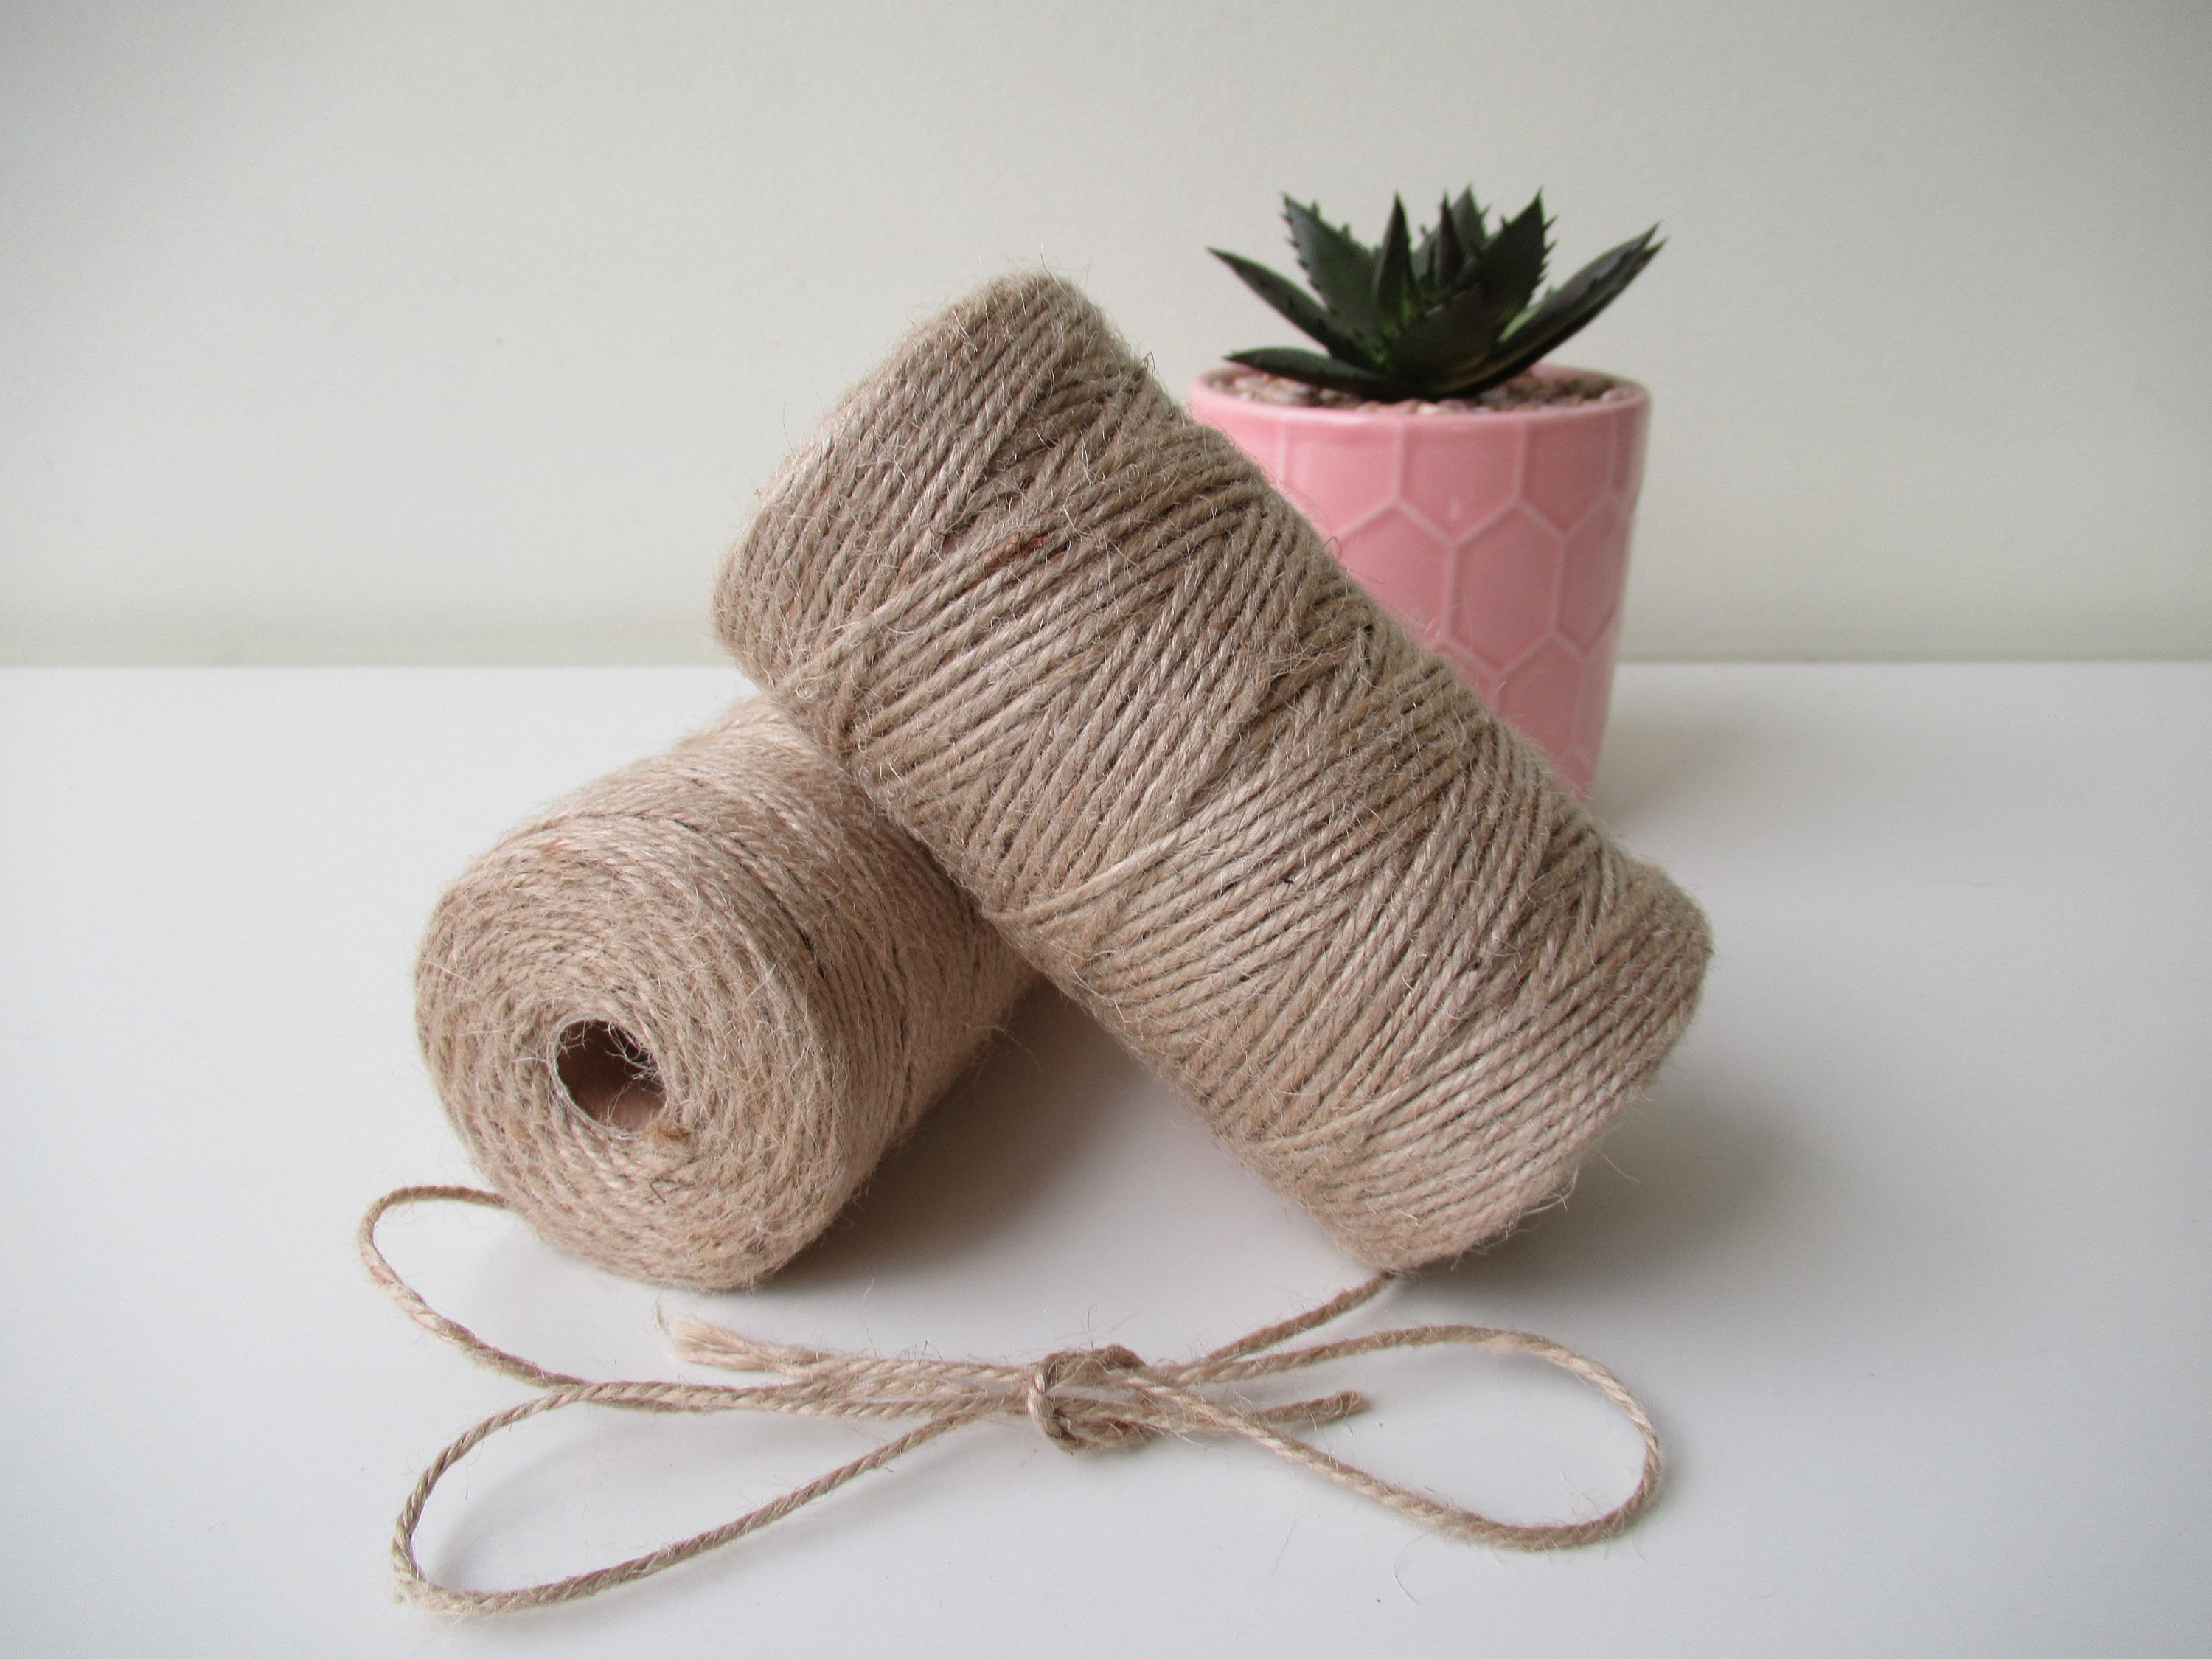 12 Color Jute Twine Natural Jute String 2mm 3 Ply Twine String for Artworks, DIY Crafts Gift Wrapping Twine, Picture Display and Embellishments Gift